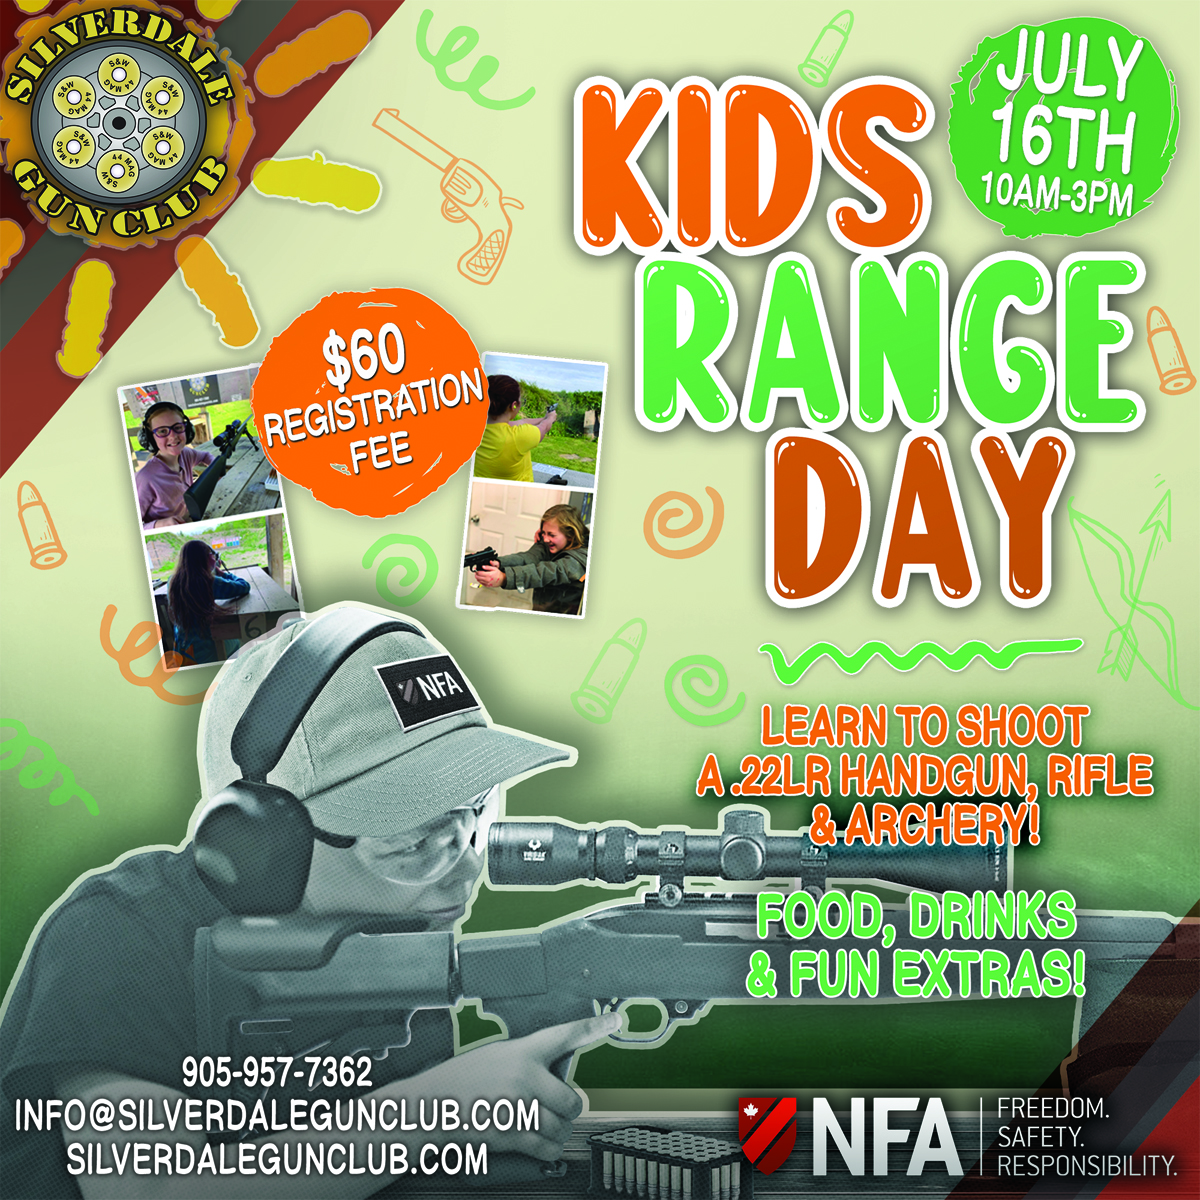 Join us at the Silverdale Gun Club - July 16th